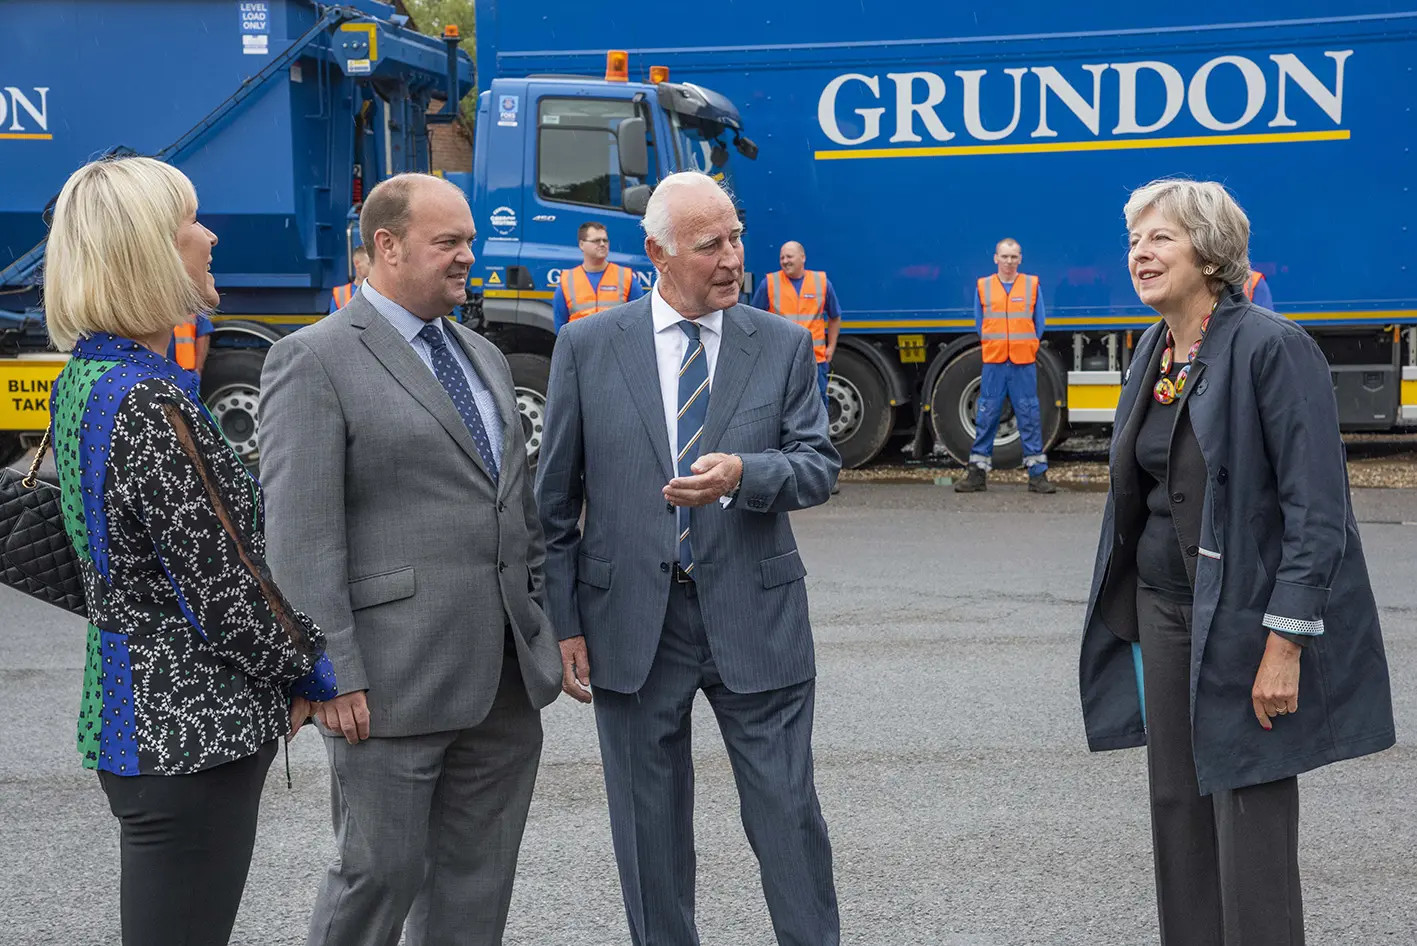 Theresa May MP was welcomed to Grundon's Knowl Hill clinical waste operation by Louise Woodbridge; Clayton Sullivan-Webb, Managing Director; and Norman Grundon, Chairman